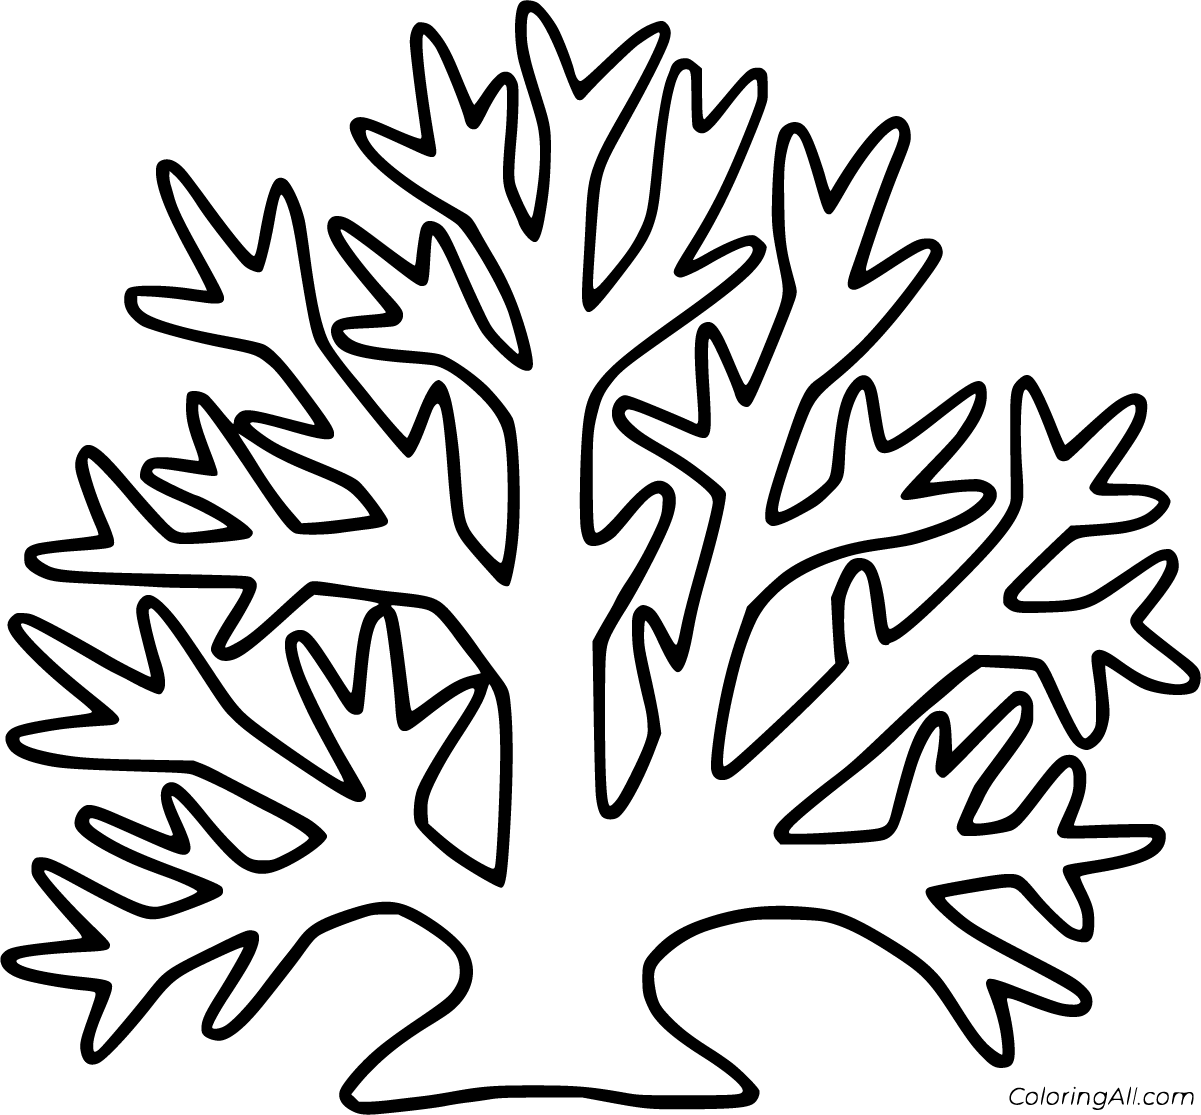 Coral Coloring Pages - ColoringAll